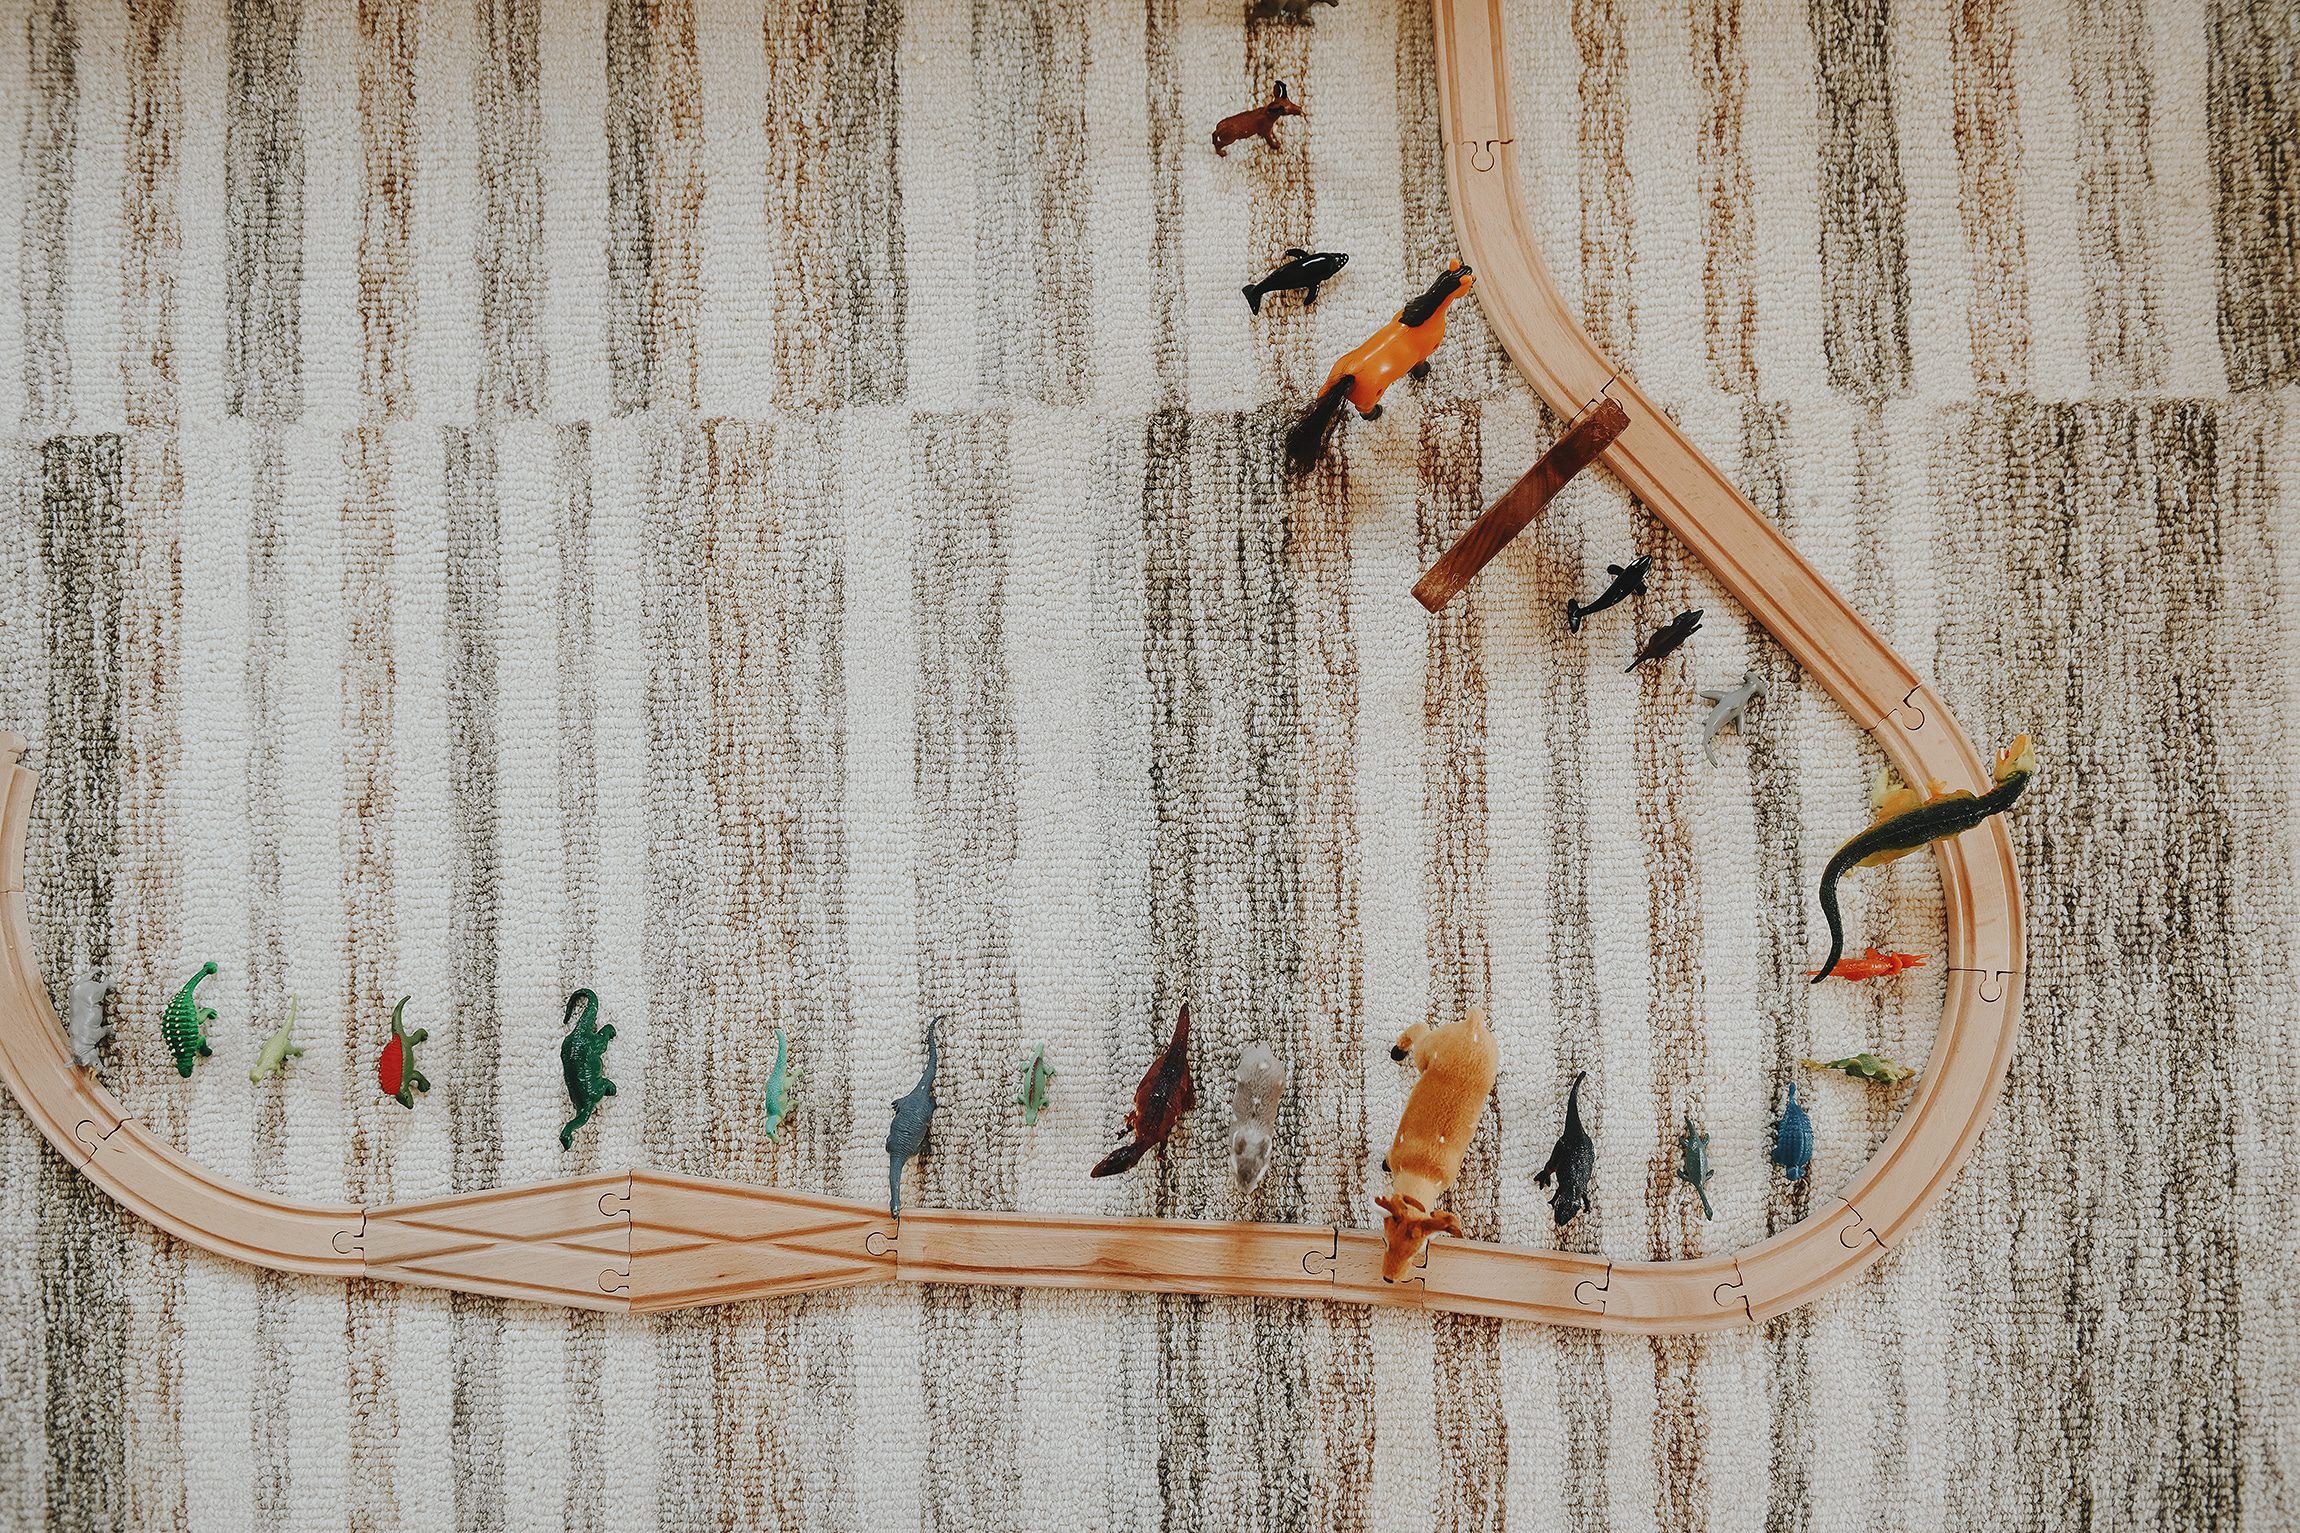 wool rug with wooden train set and a row of toy dinosaurs